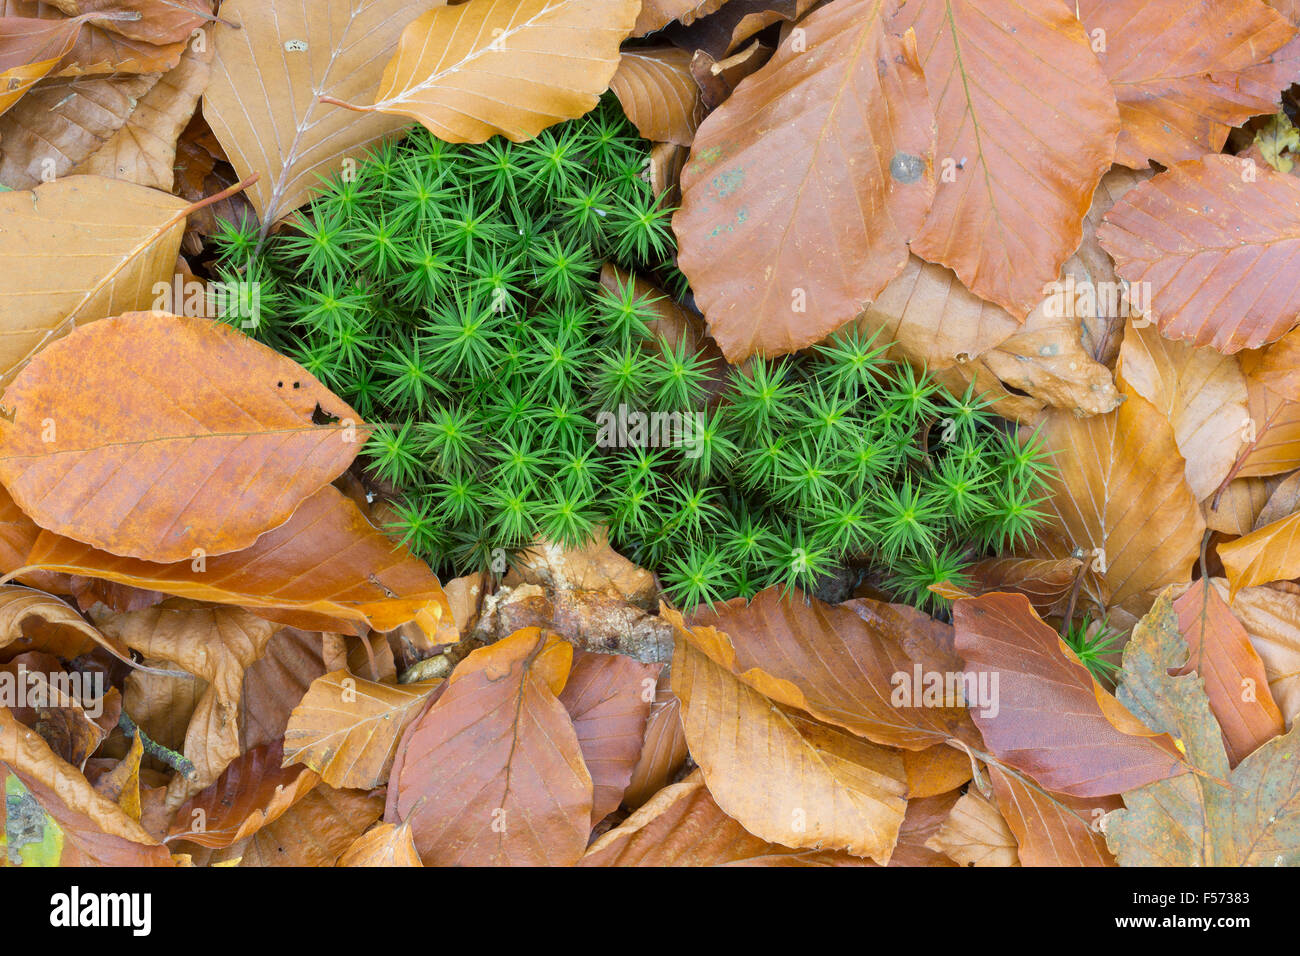 Common Haircap moss, Polytrichum commune, and Beech leaves, in autumn. Stock Photo